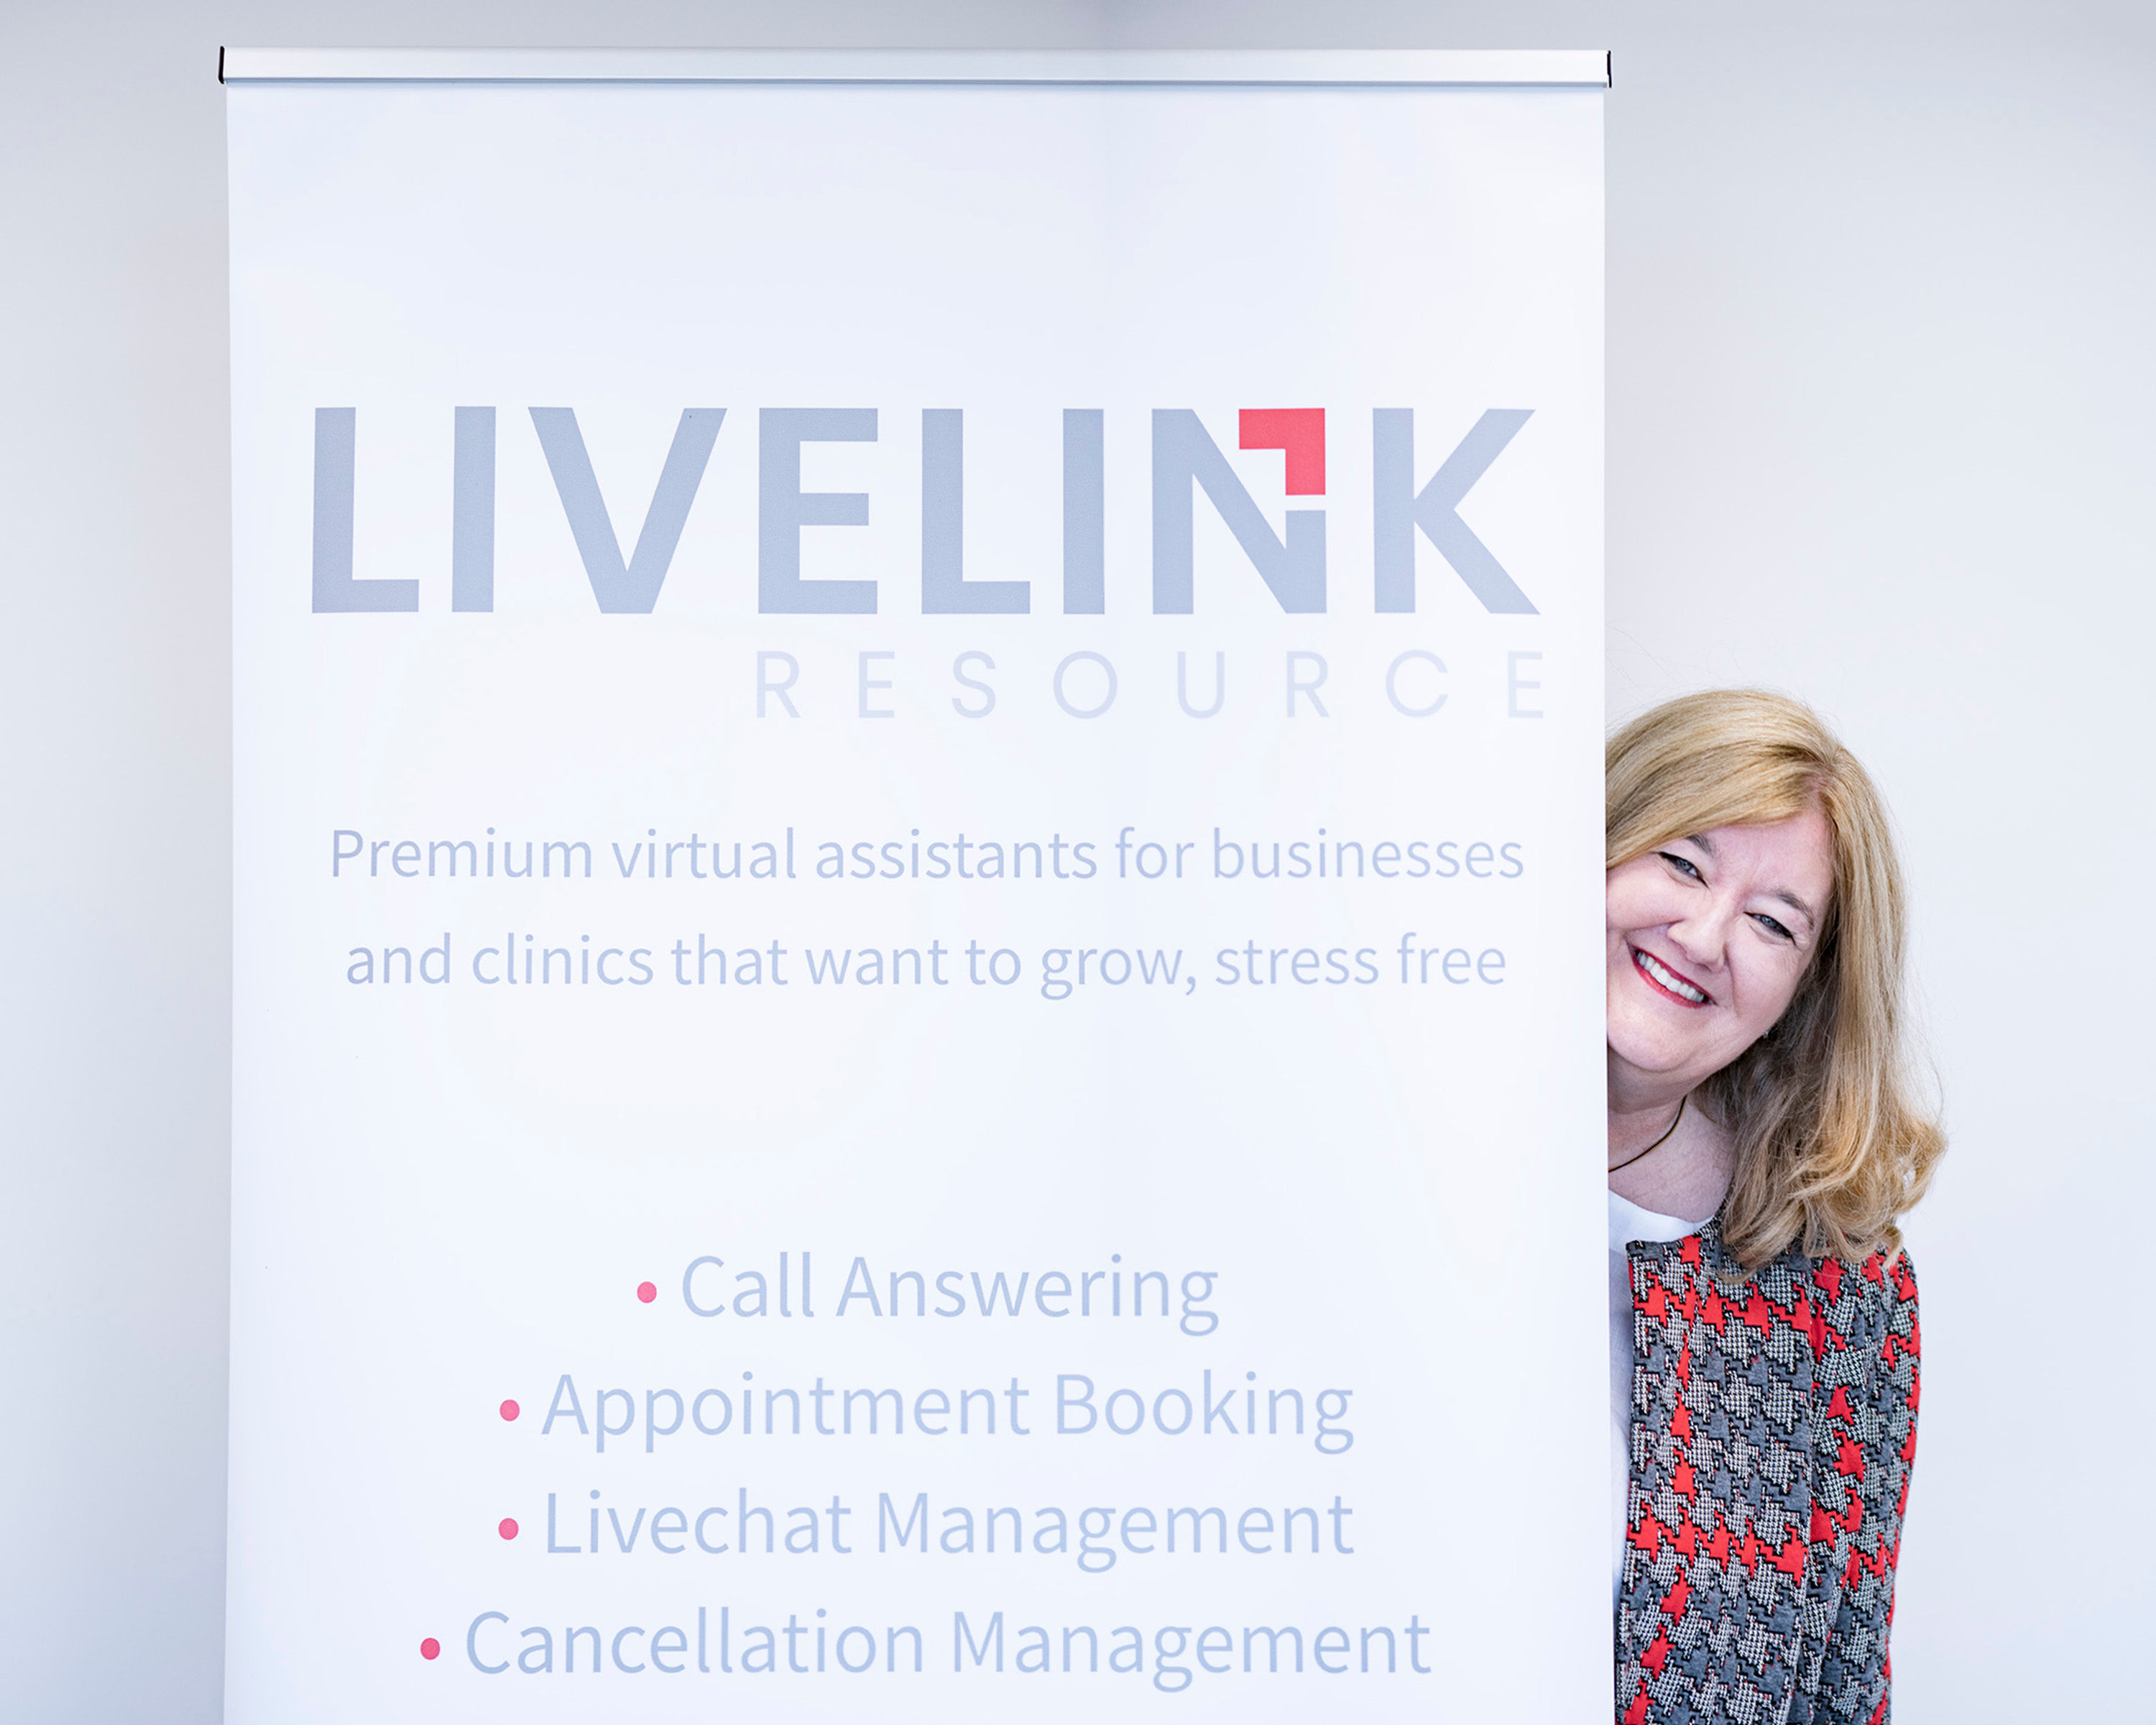 Who are LiveLink